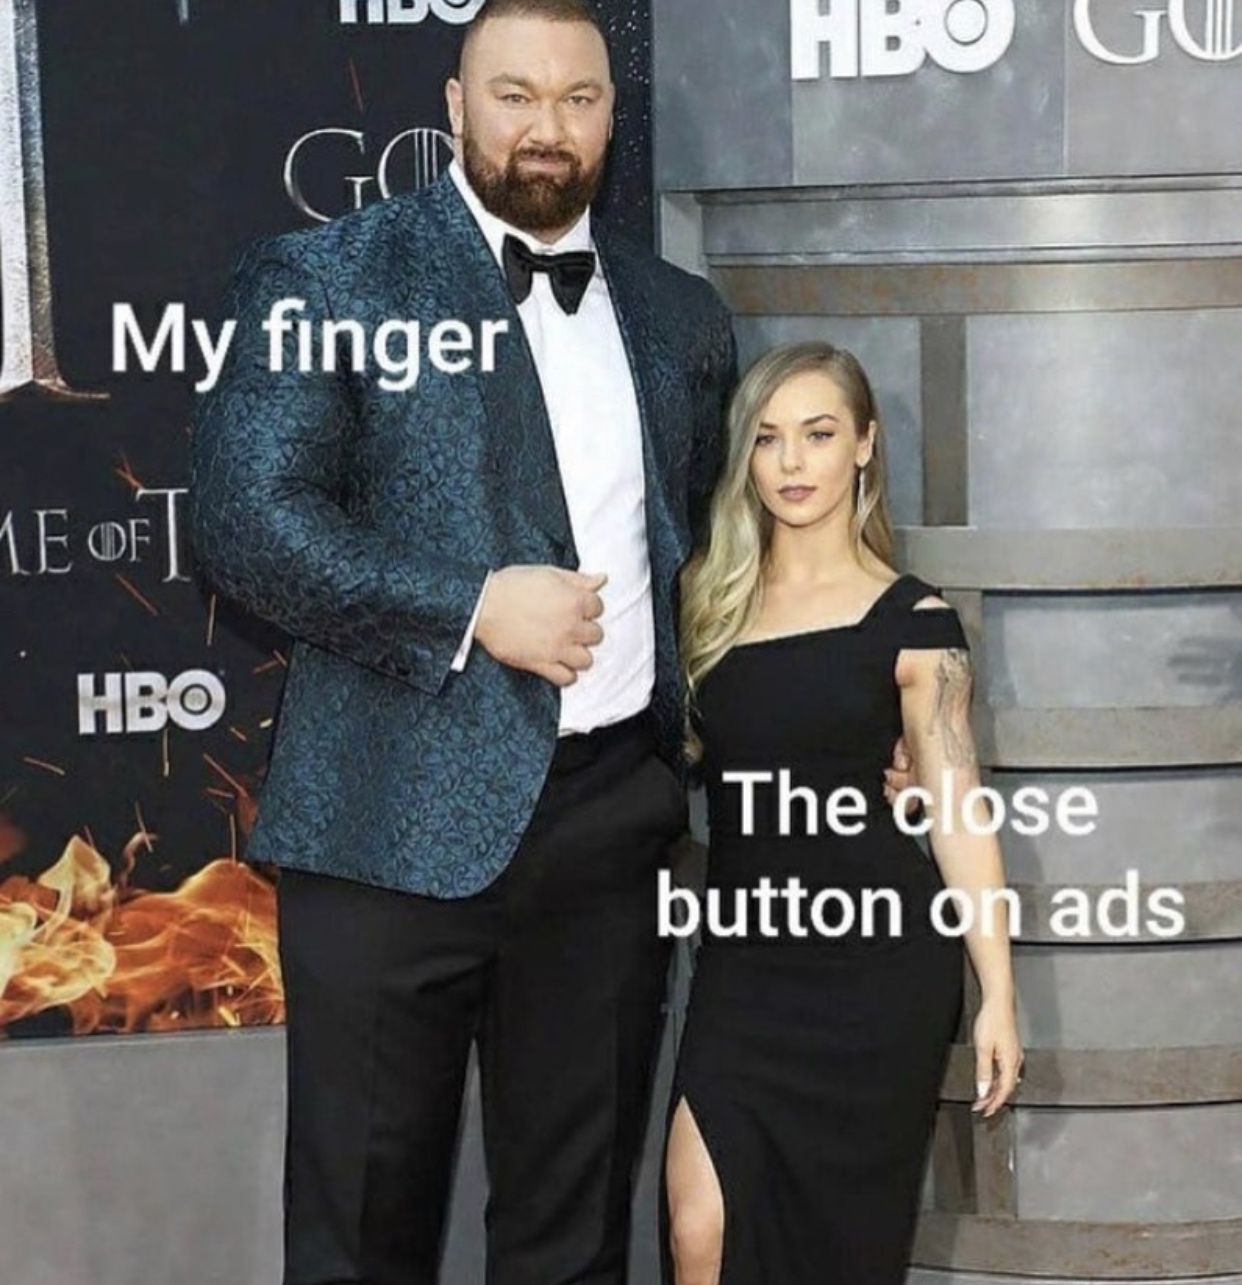 hafthor bjornsson wife - Hb Gro My finger 1E Oft Hbo The close button on ads